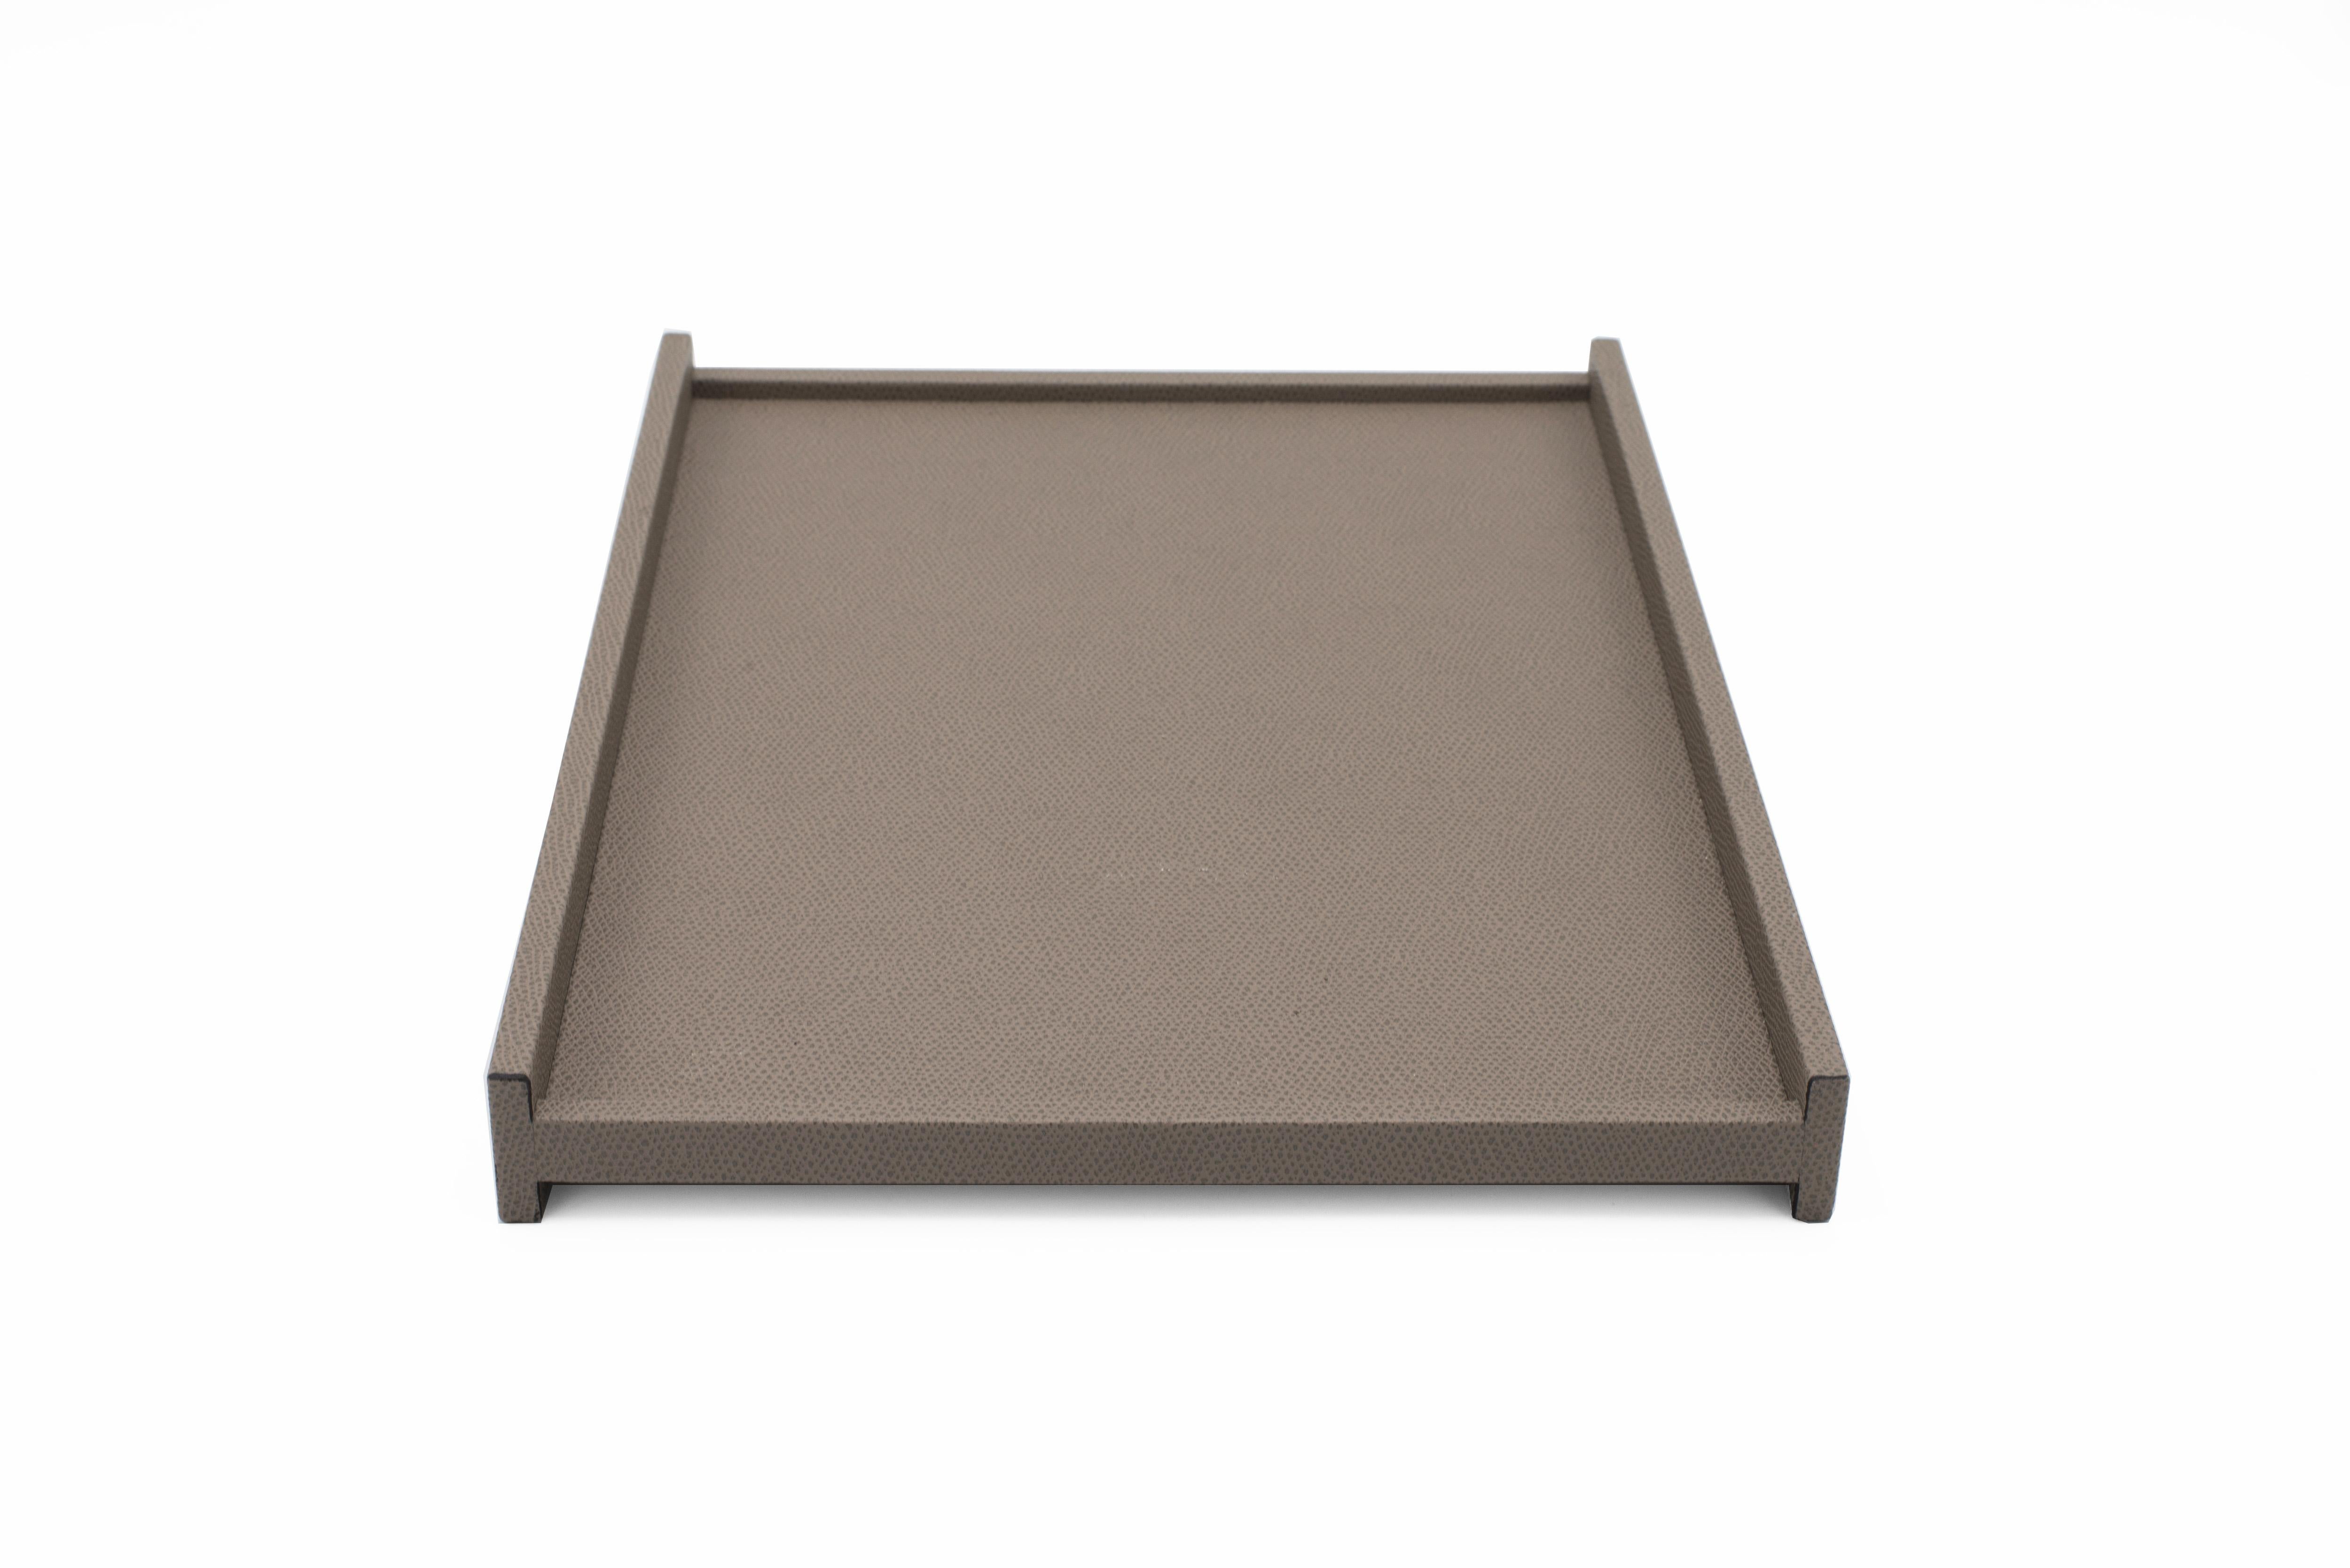 Contemporary rectangular taupe calfskin valet tray with two low sides and two taller sides (Made in Italy).